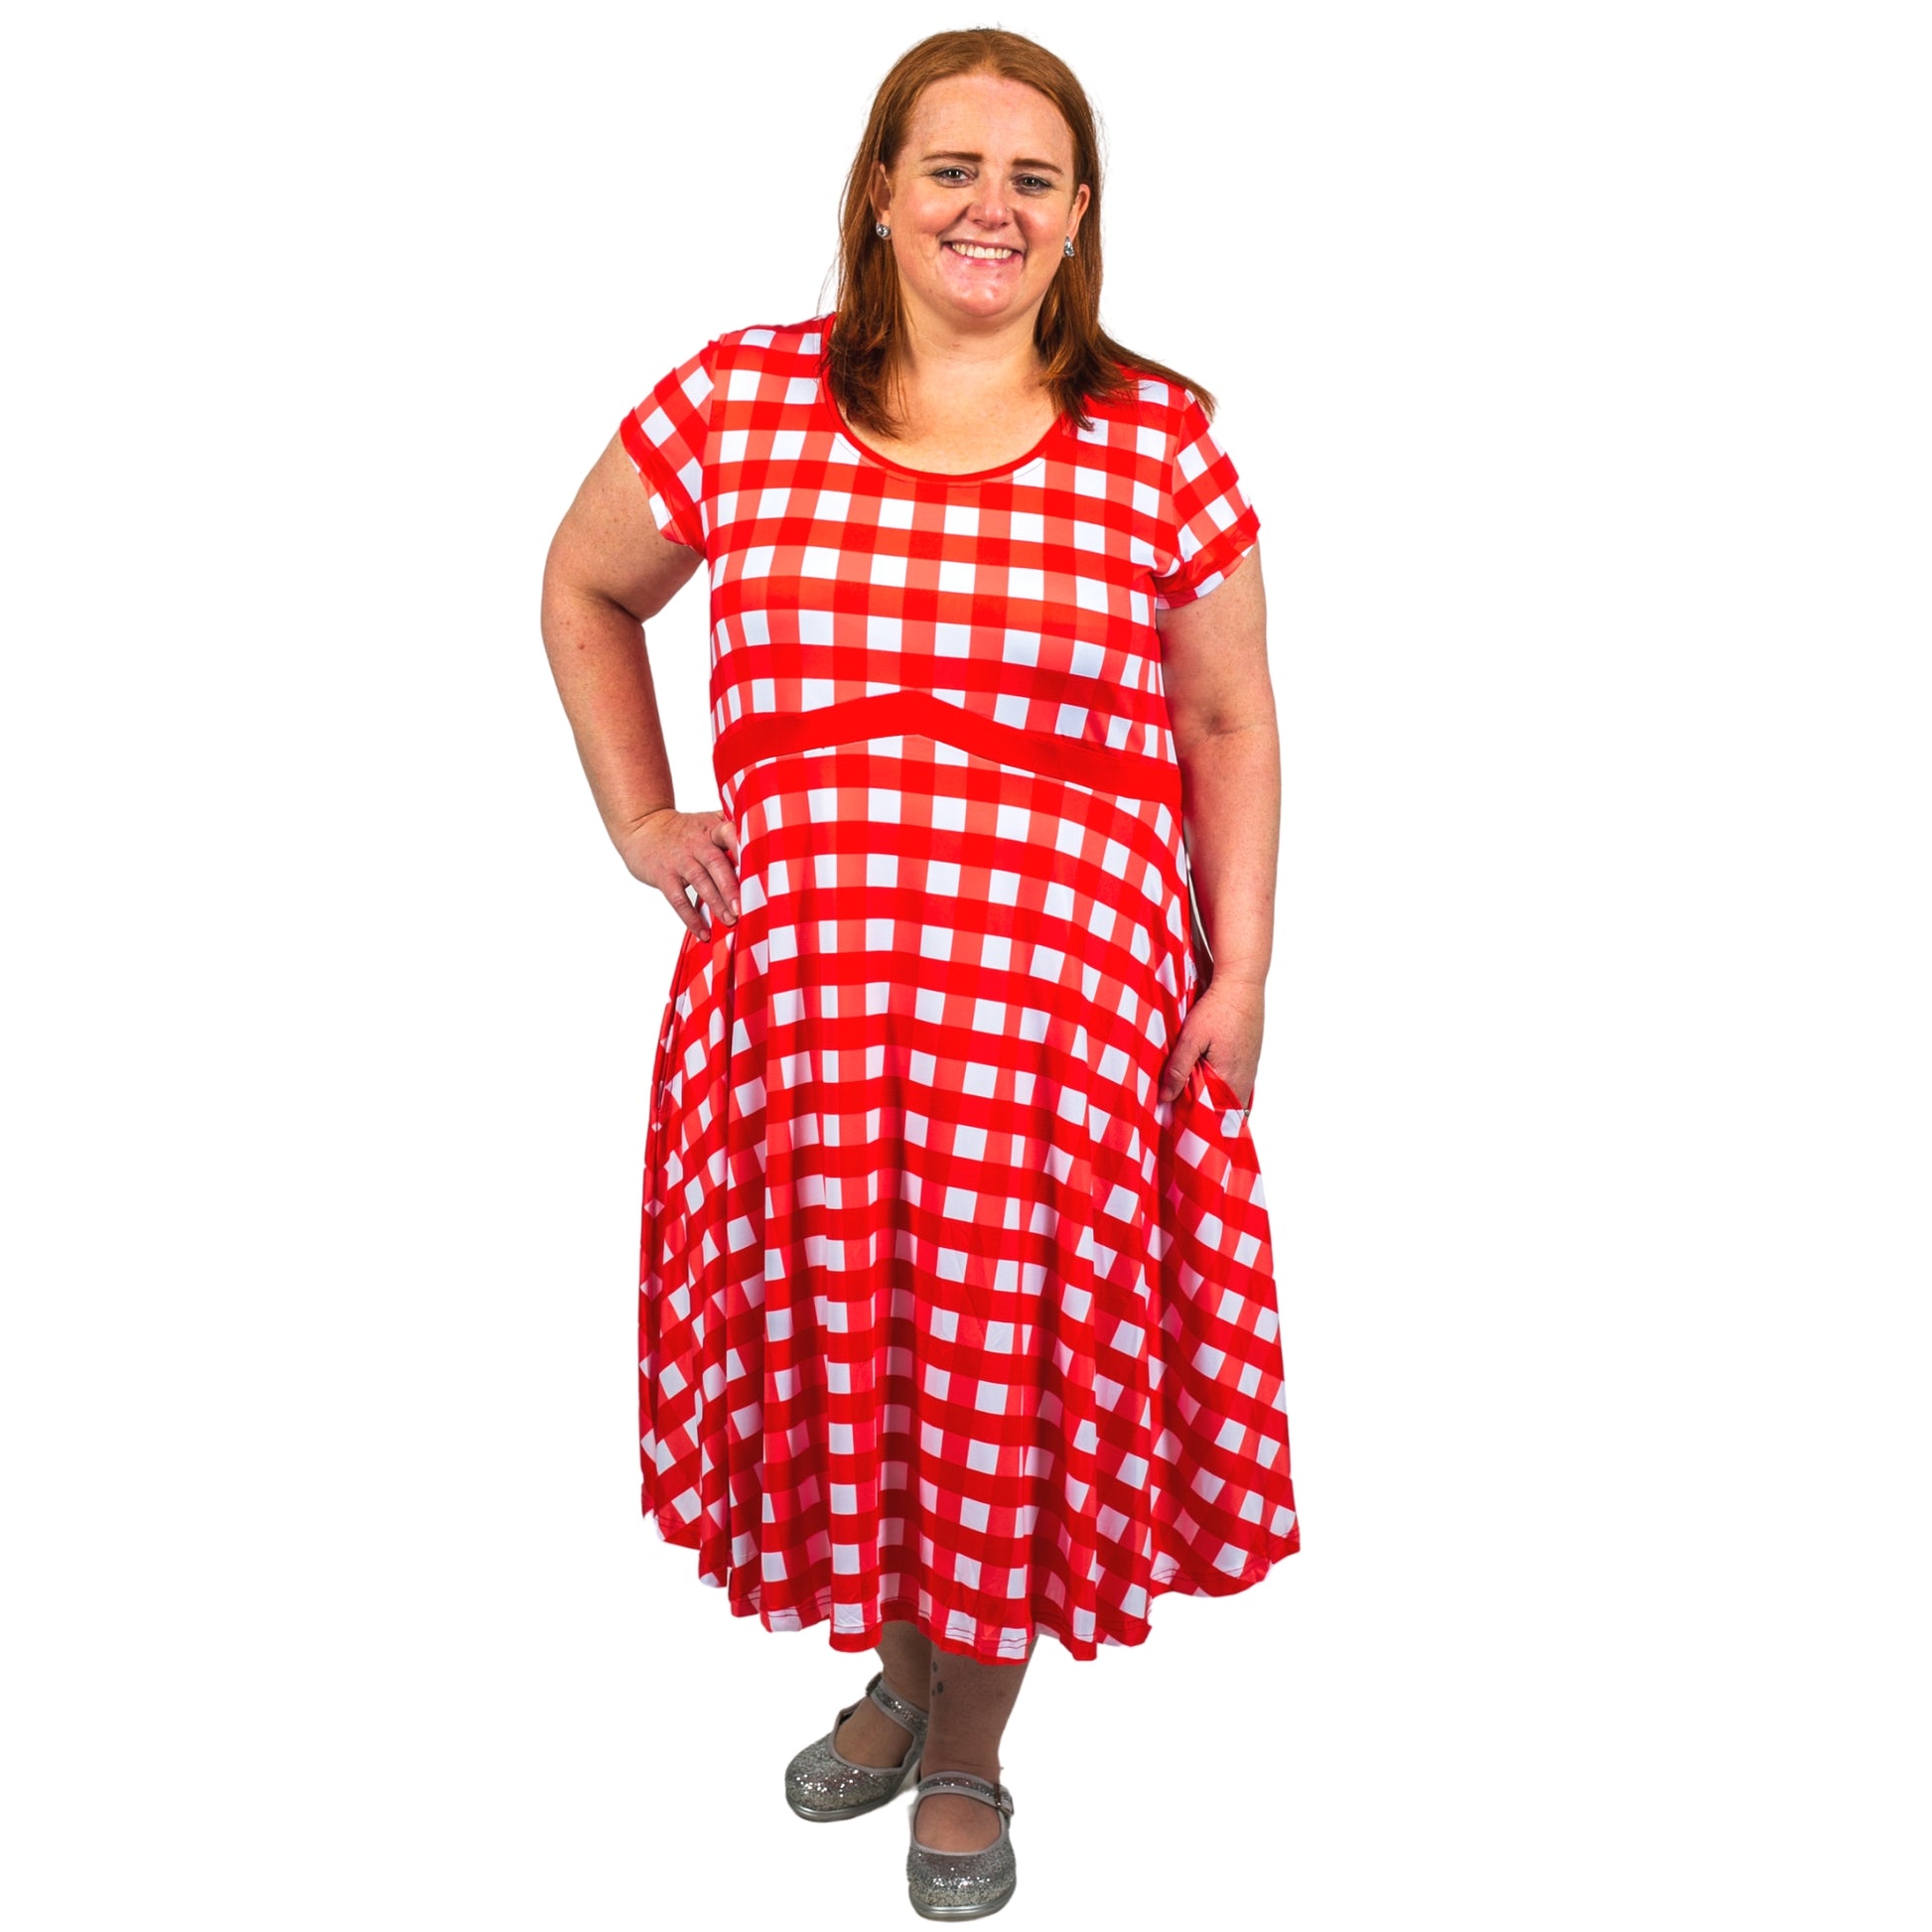 Red Gingham Tea Dress by RainbowsAndFairies.com (Check - Picnic - Dress With Pockets - Rockabilly  - Vintage Inspired) - SKU: CL_TEADR_GINGH_RED - Pic 03